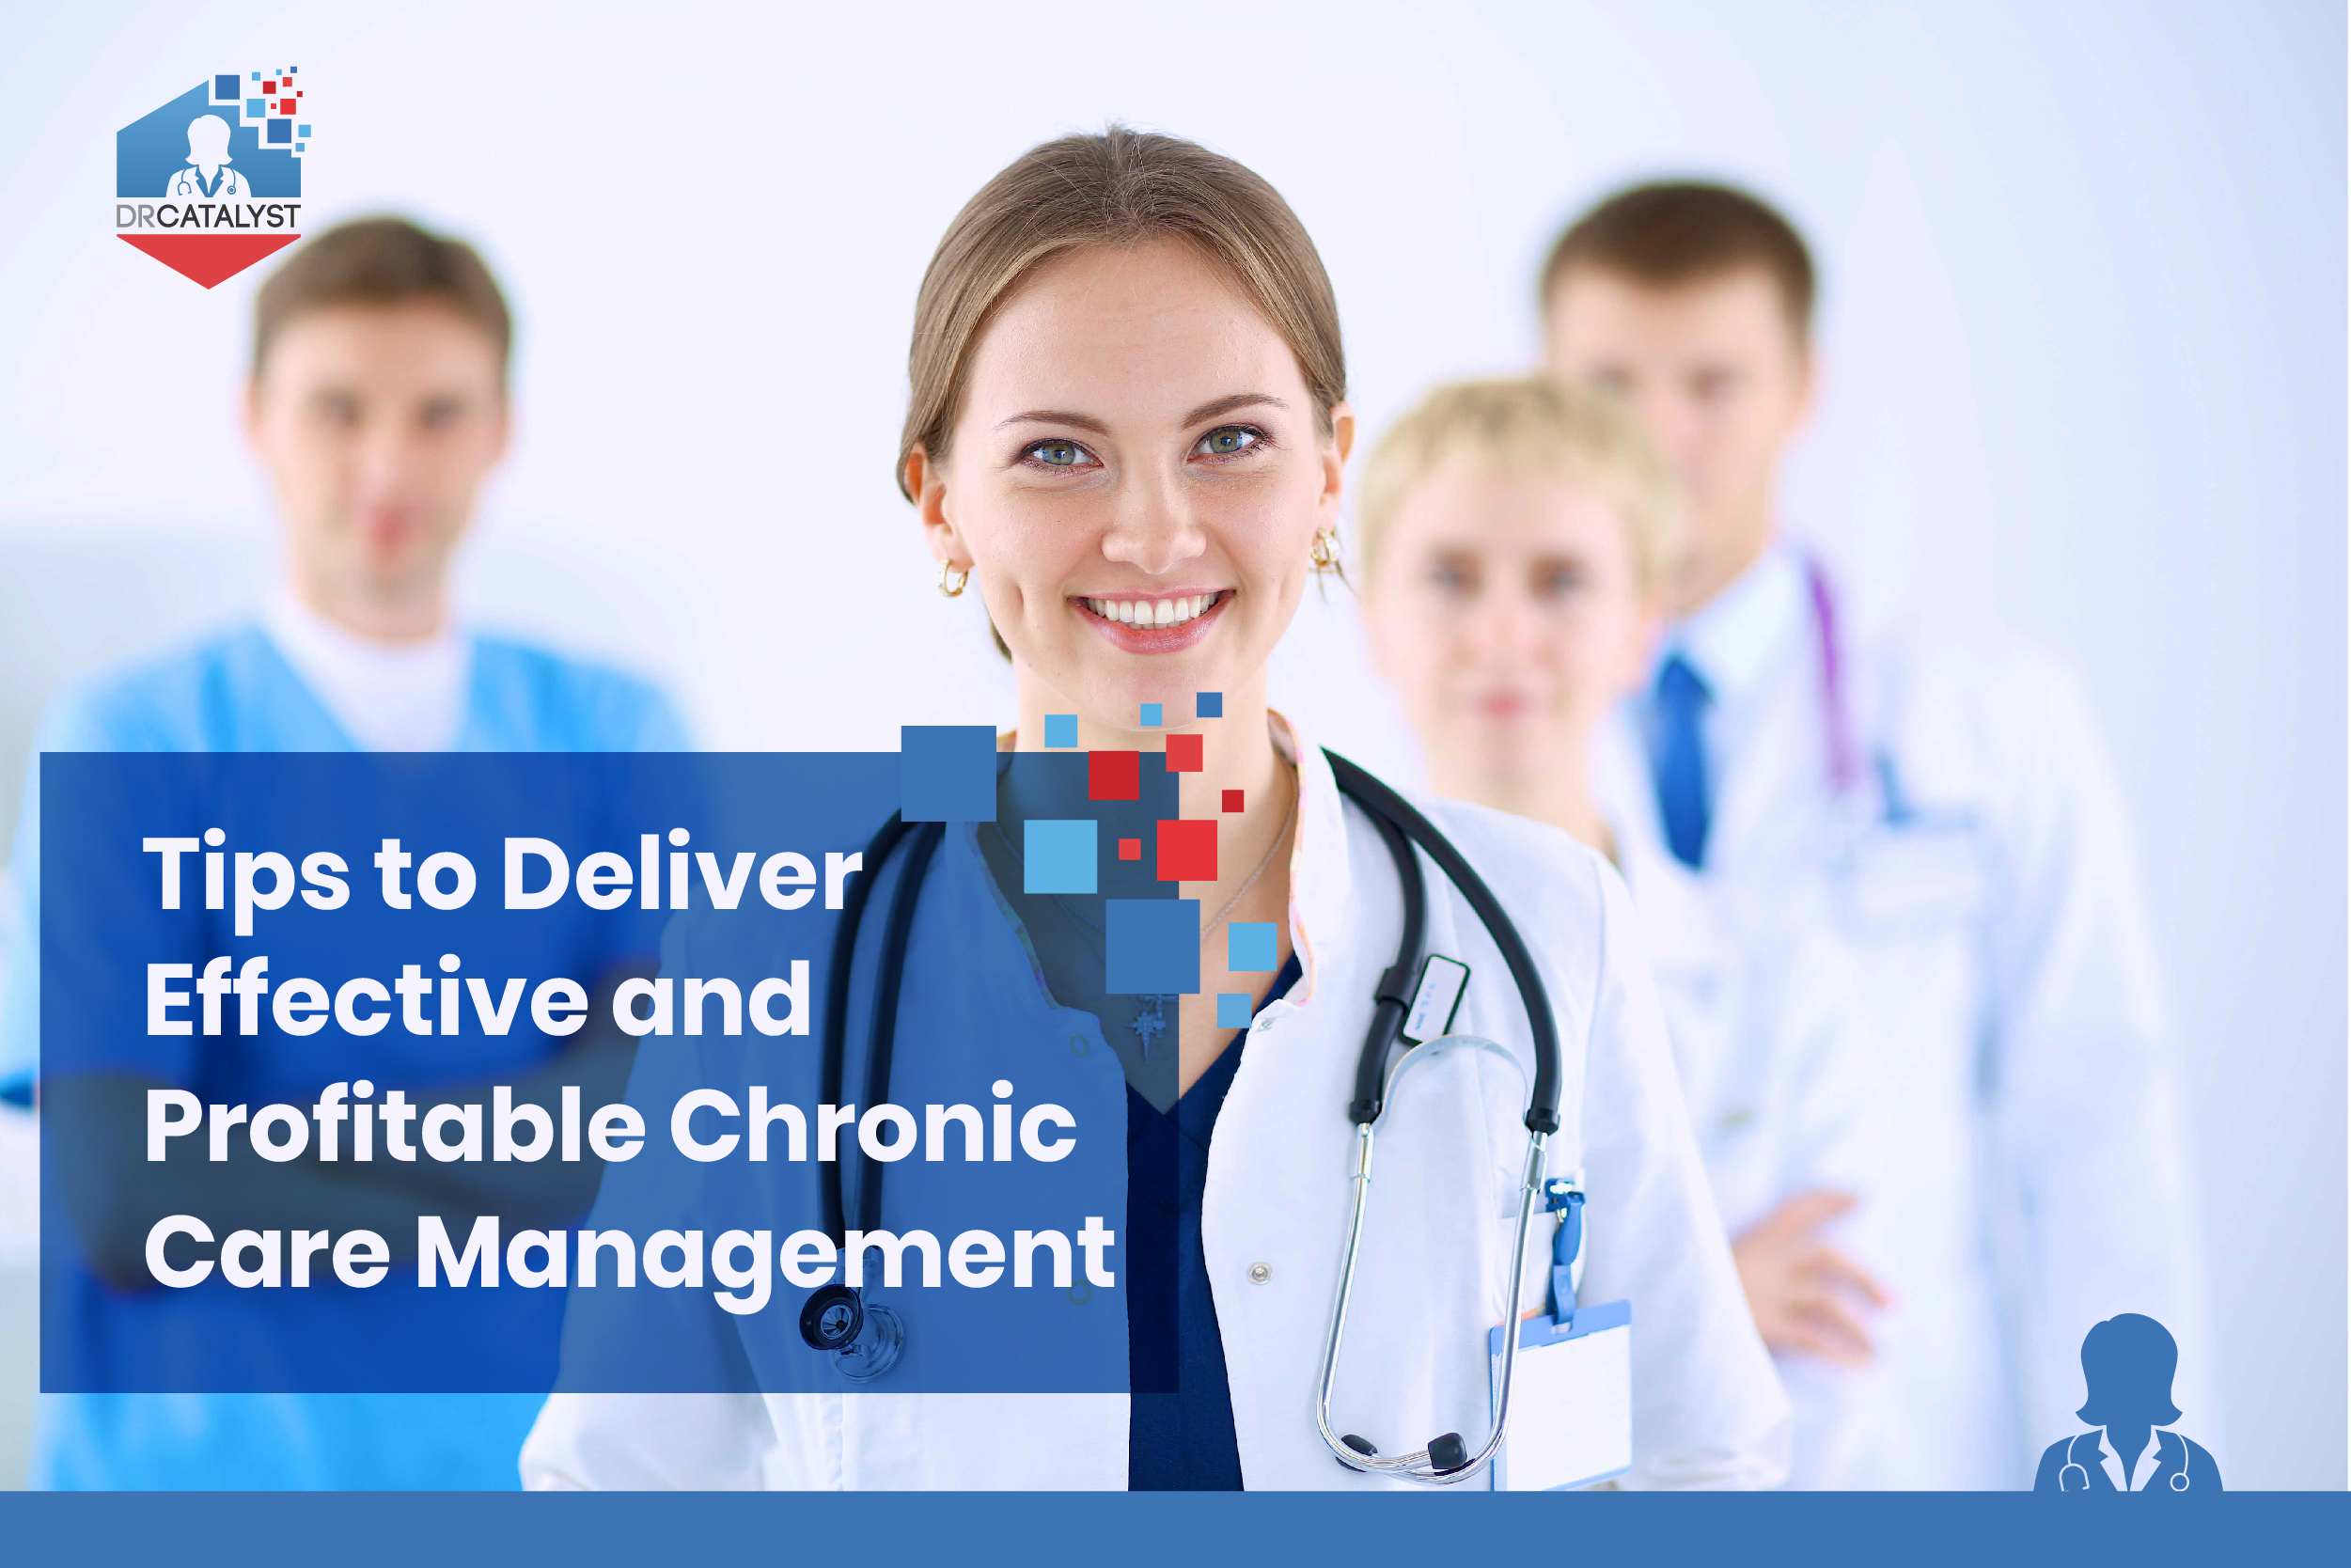 Tips to Deliver Effective and Profitable Chronic Care Management